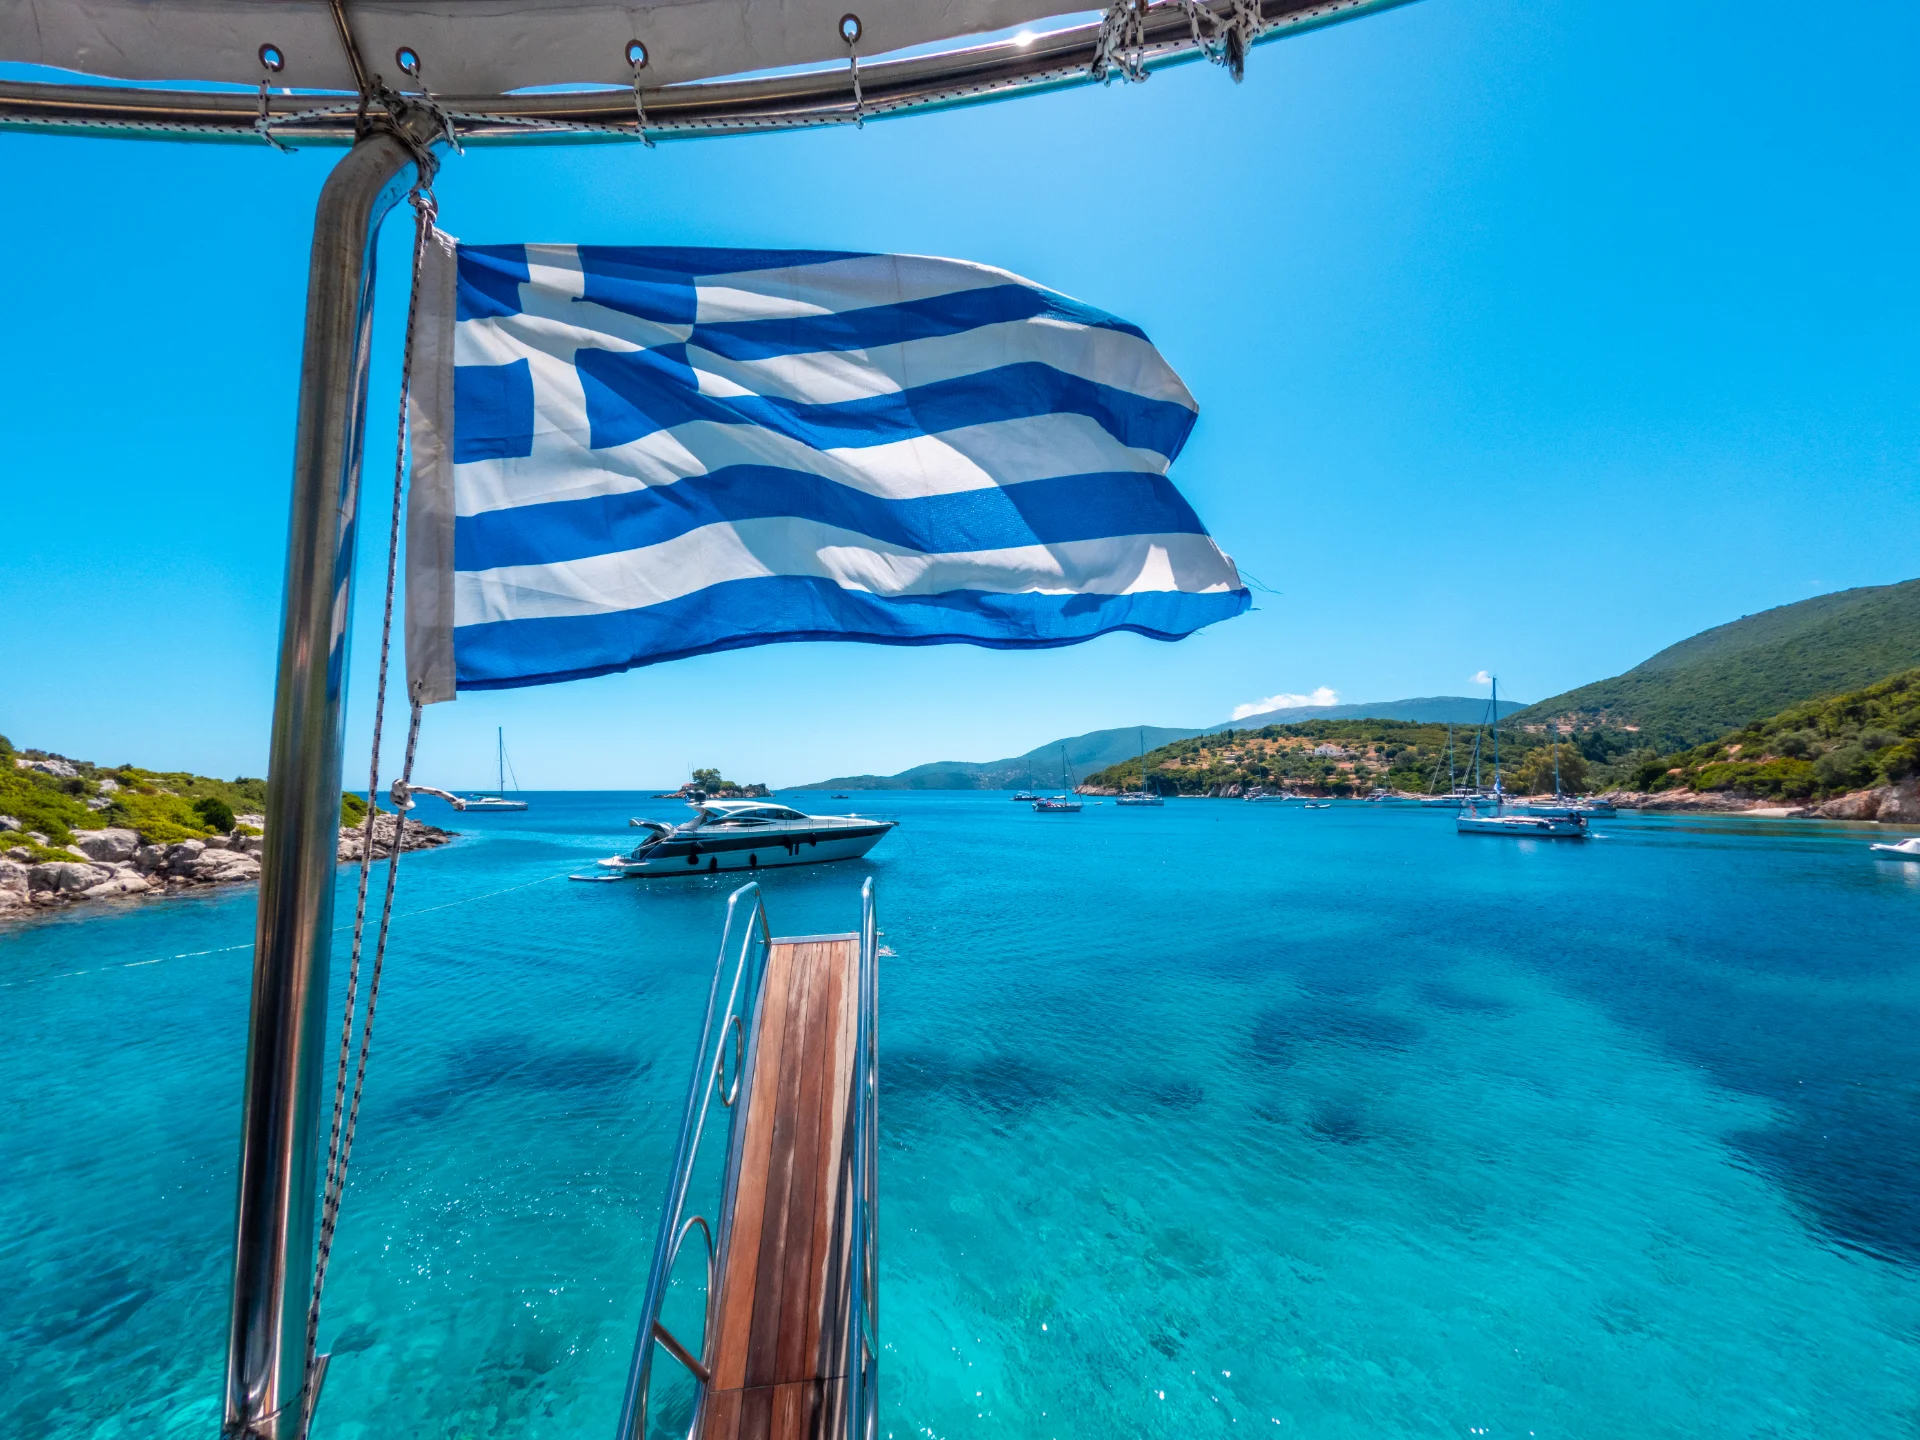 A Greek flag flutters in the breeze on a boat, overlooking a pristine turquoise bay with several sailboats and yachts. The coastline is dotted with green hills under a clear blue sky, evoking a serene Mediterranean scene.